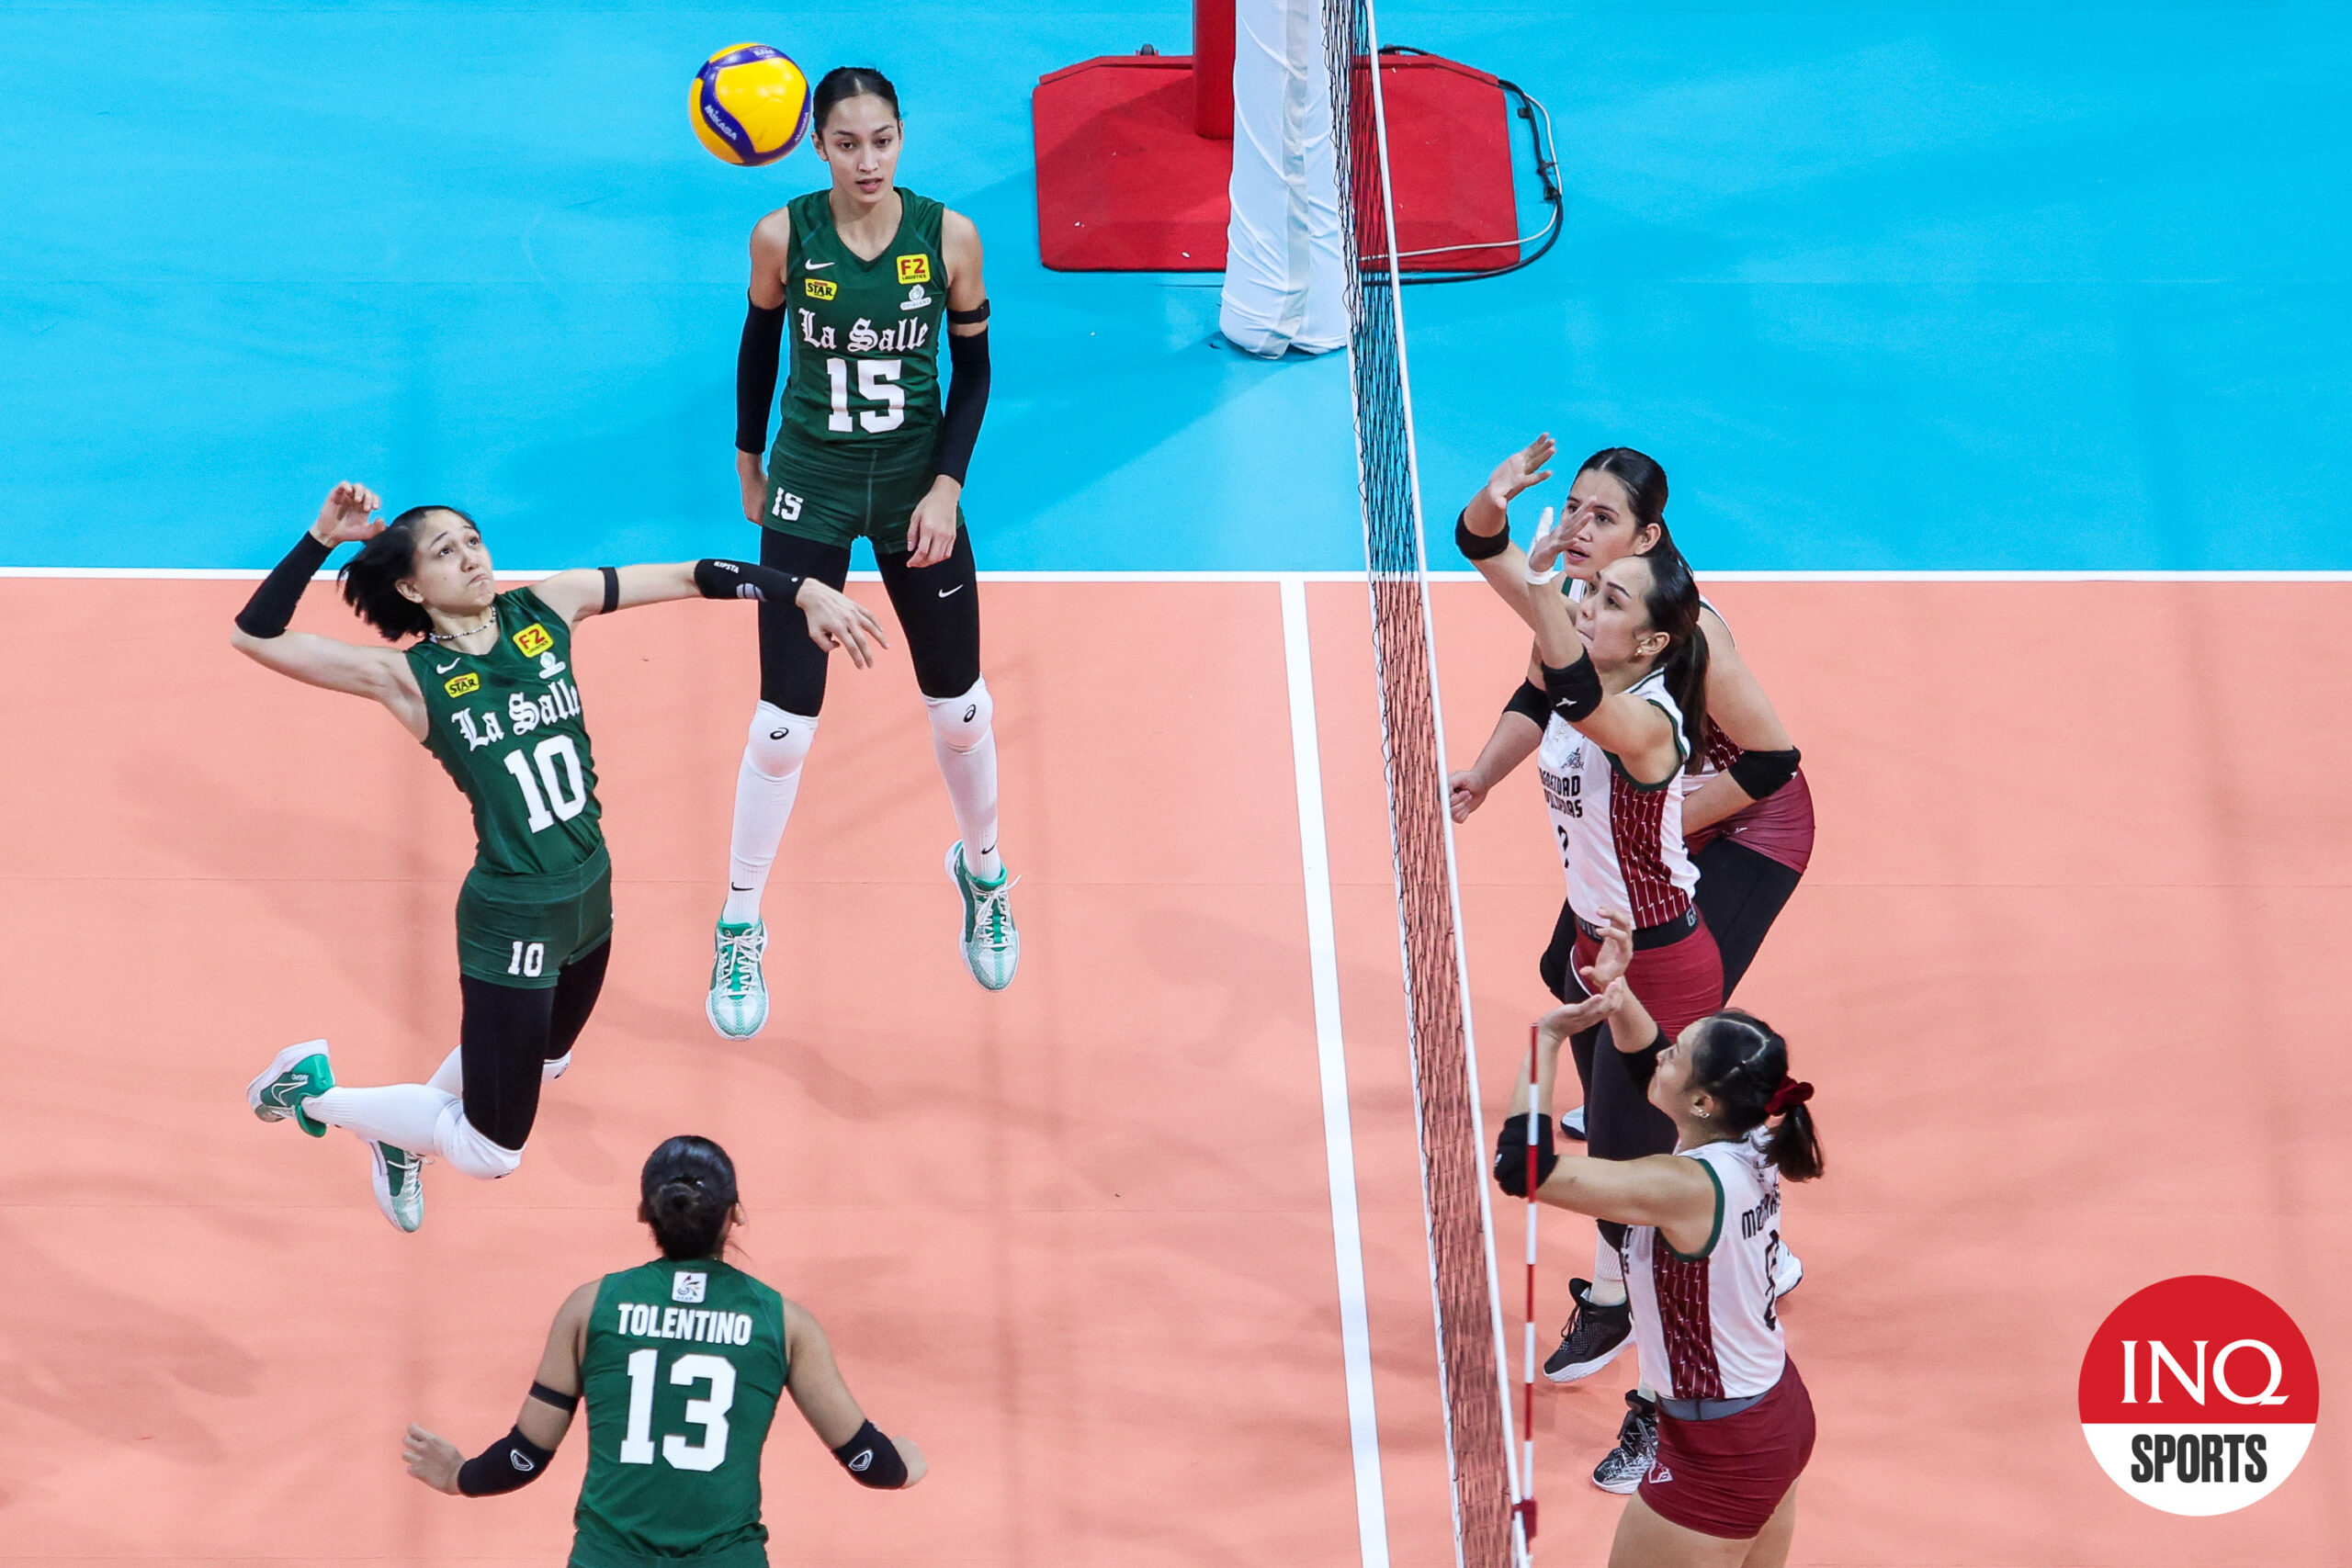 La Salle Lady Spikers' Maicah Larroza UAAP volleyball